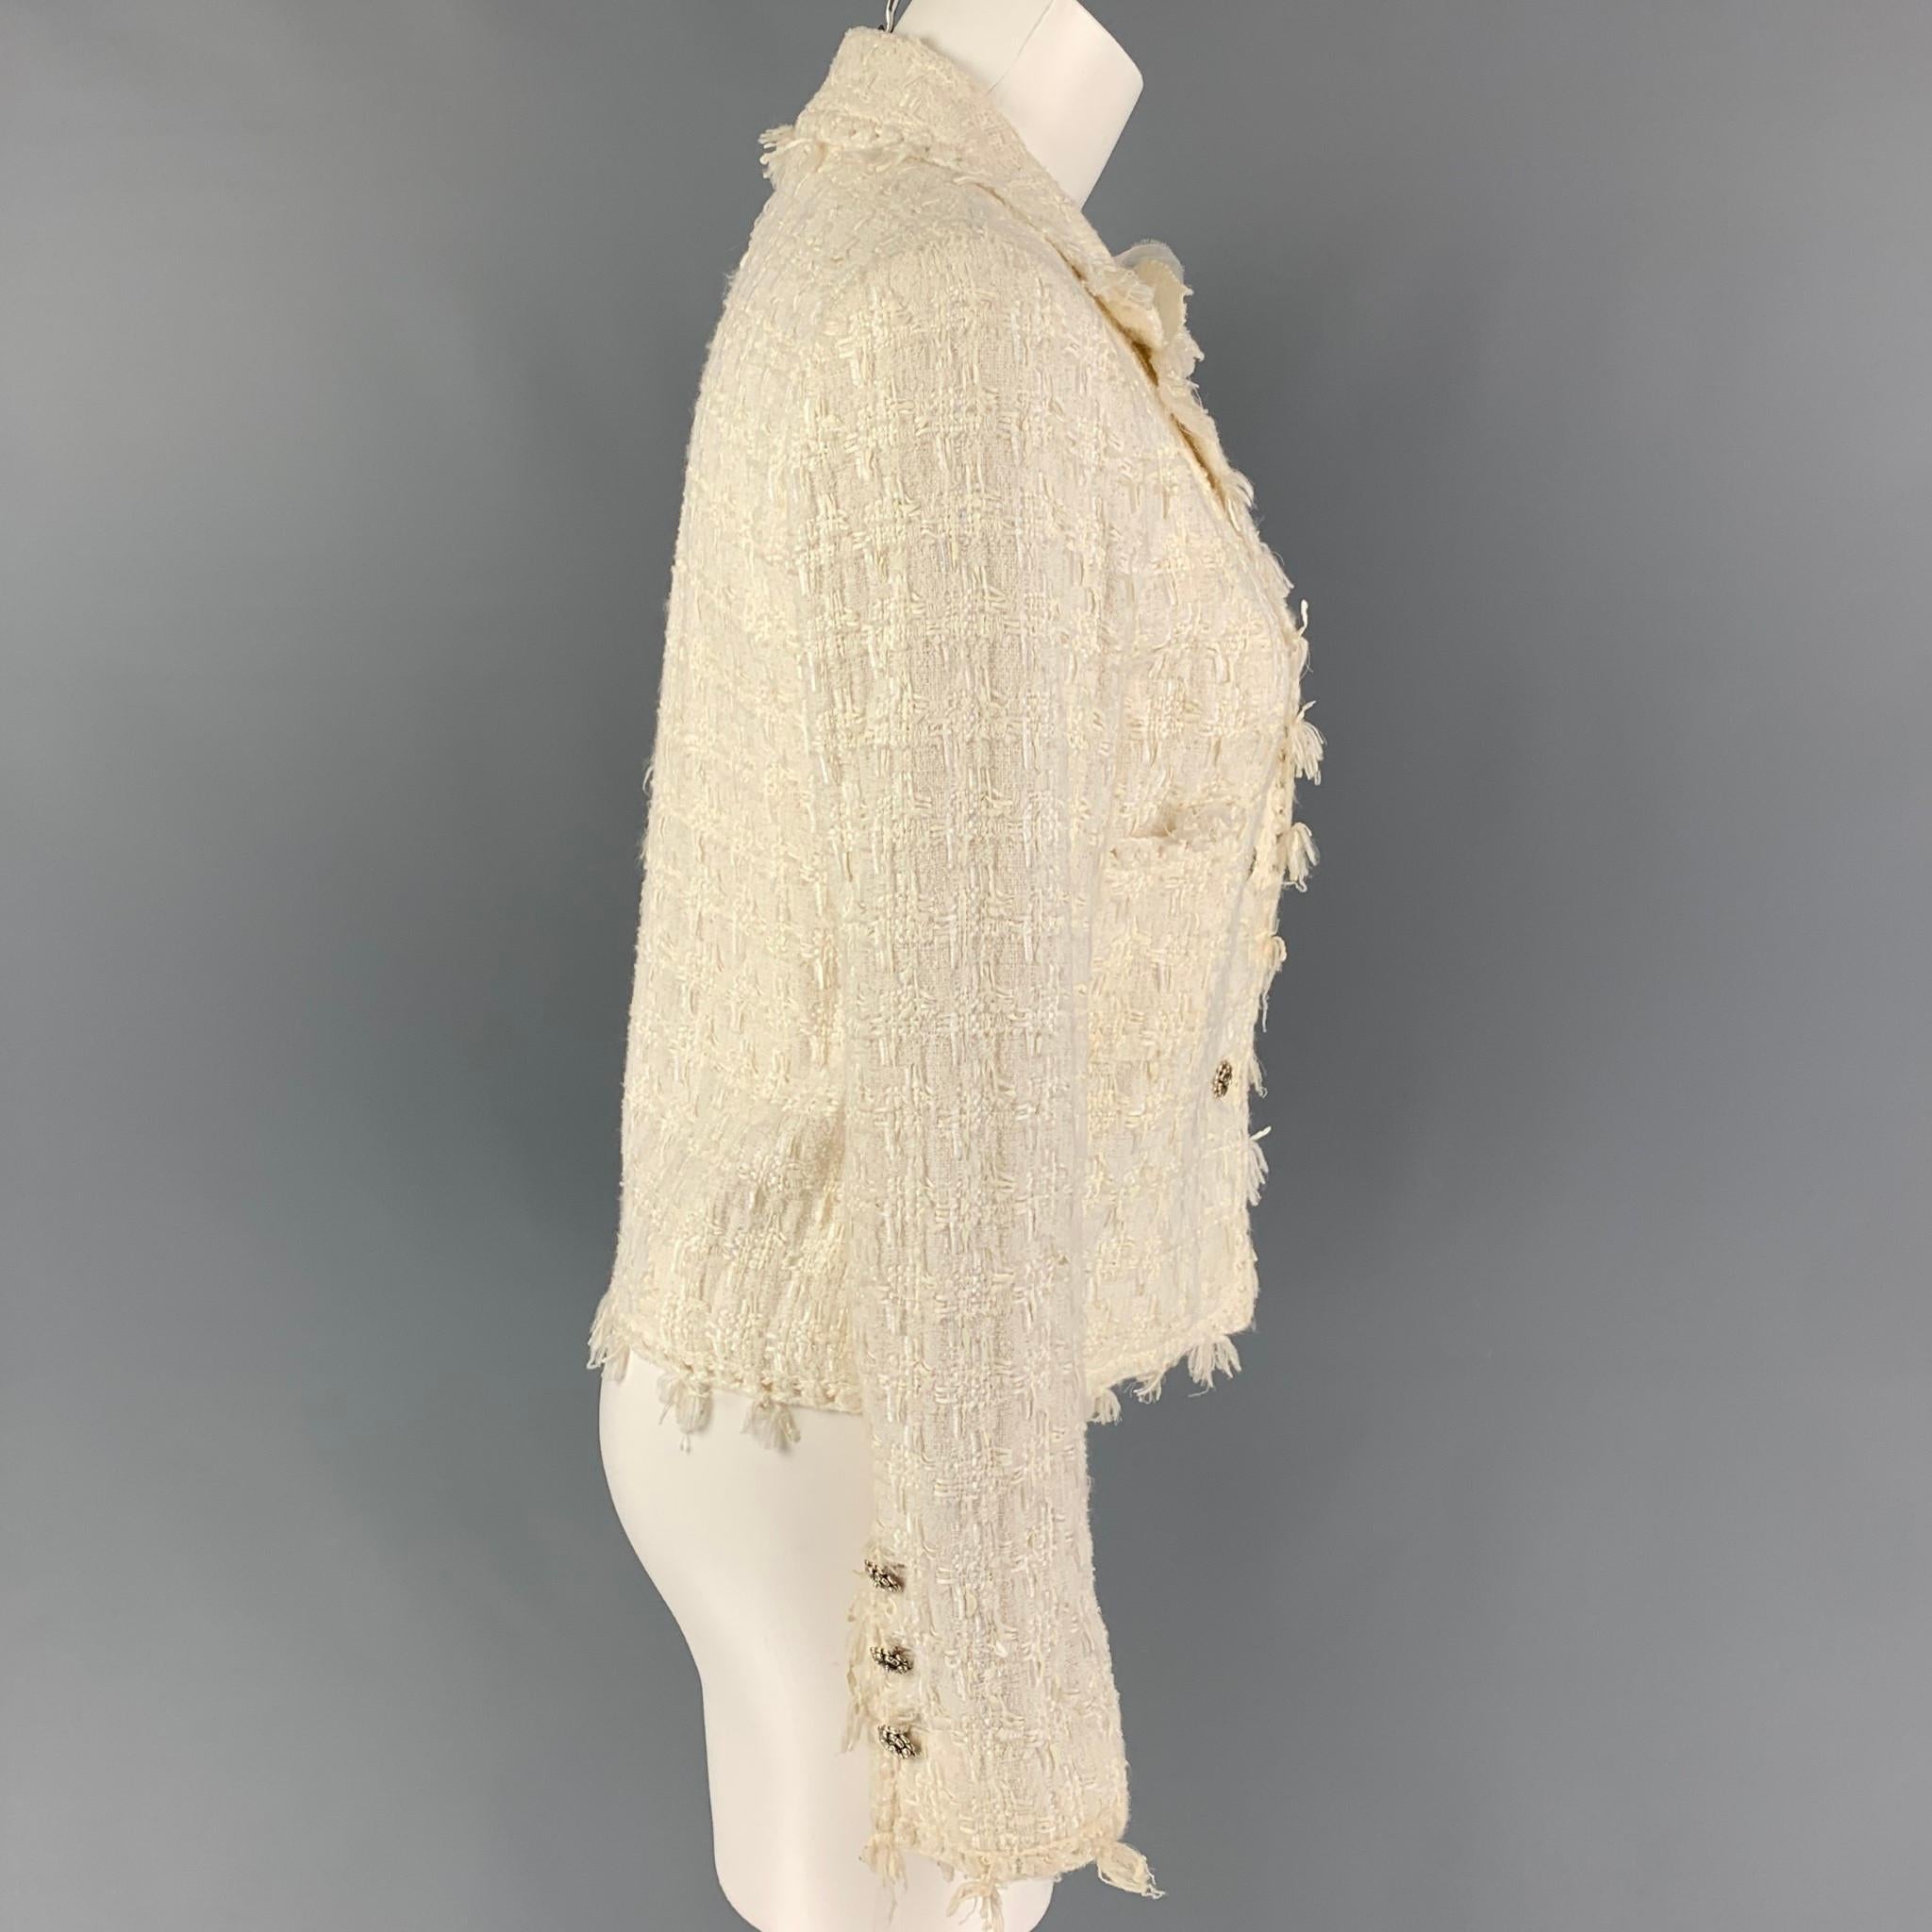 CHANEL jacket comes in a cream boucle cotton blend with a full monogram liner featuring a notch lapel, camelia pin detail, silver tone buttons, and a three button closure. Made in France. 

Very Good Pre-Owned Condition. Small mark at